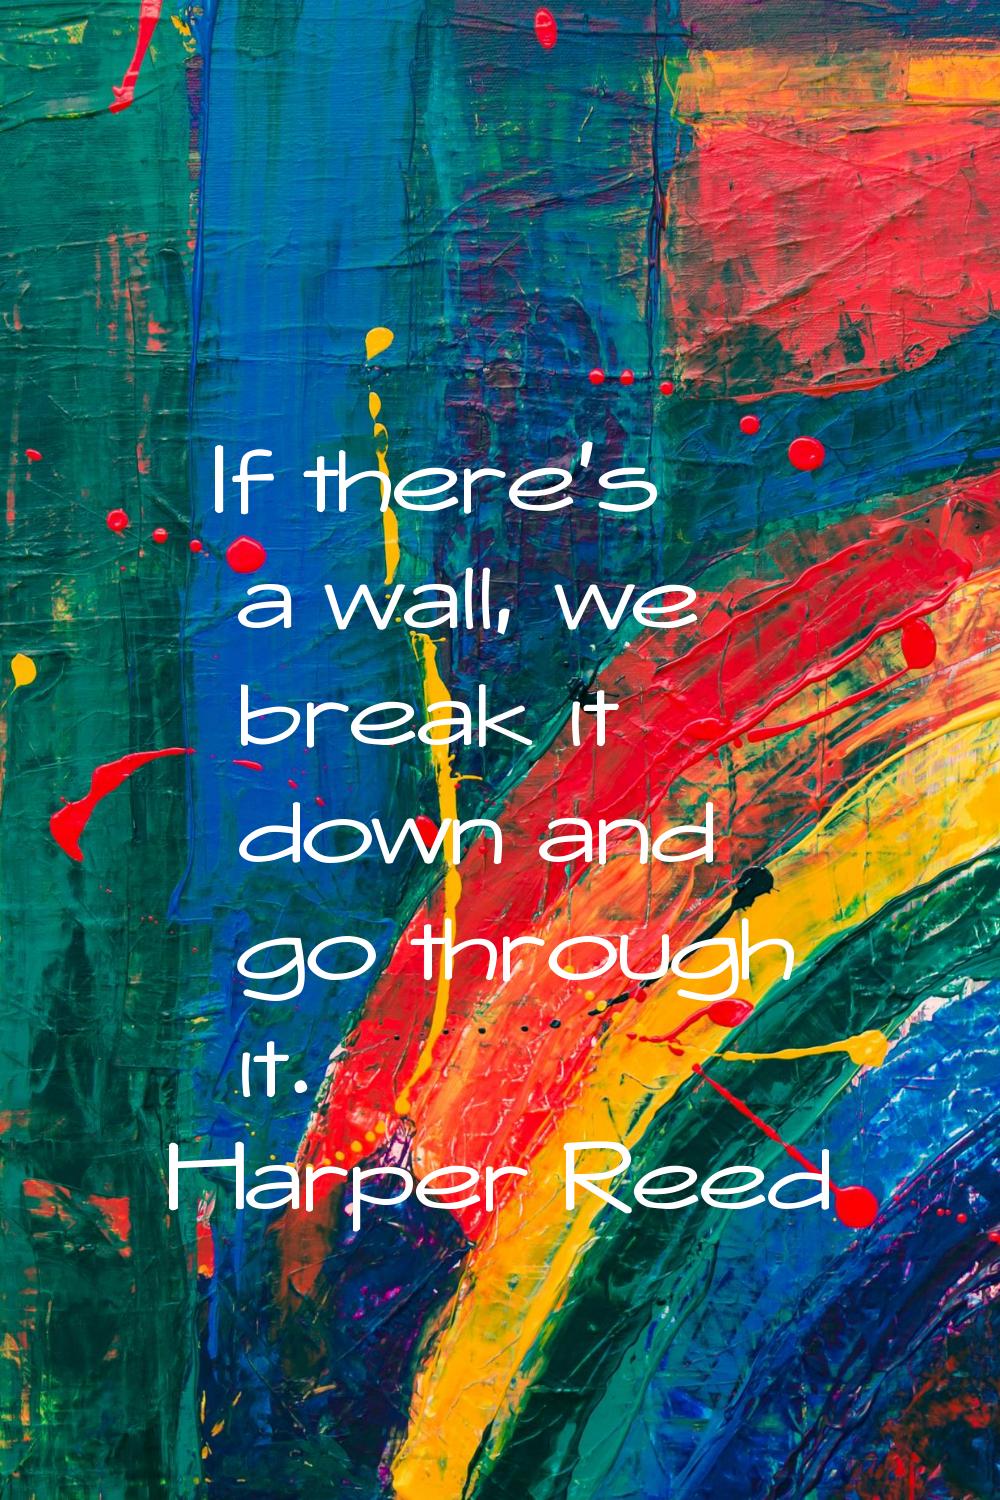 If there's a wall, we break it down and go through it.